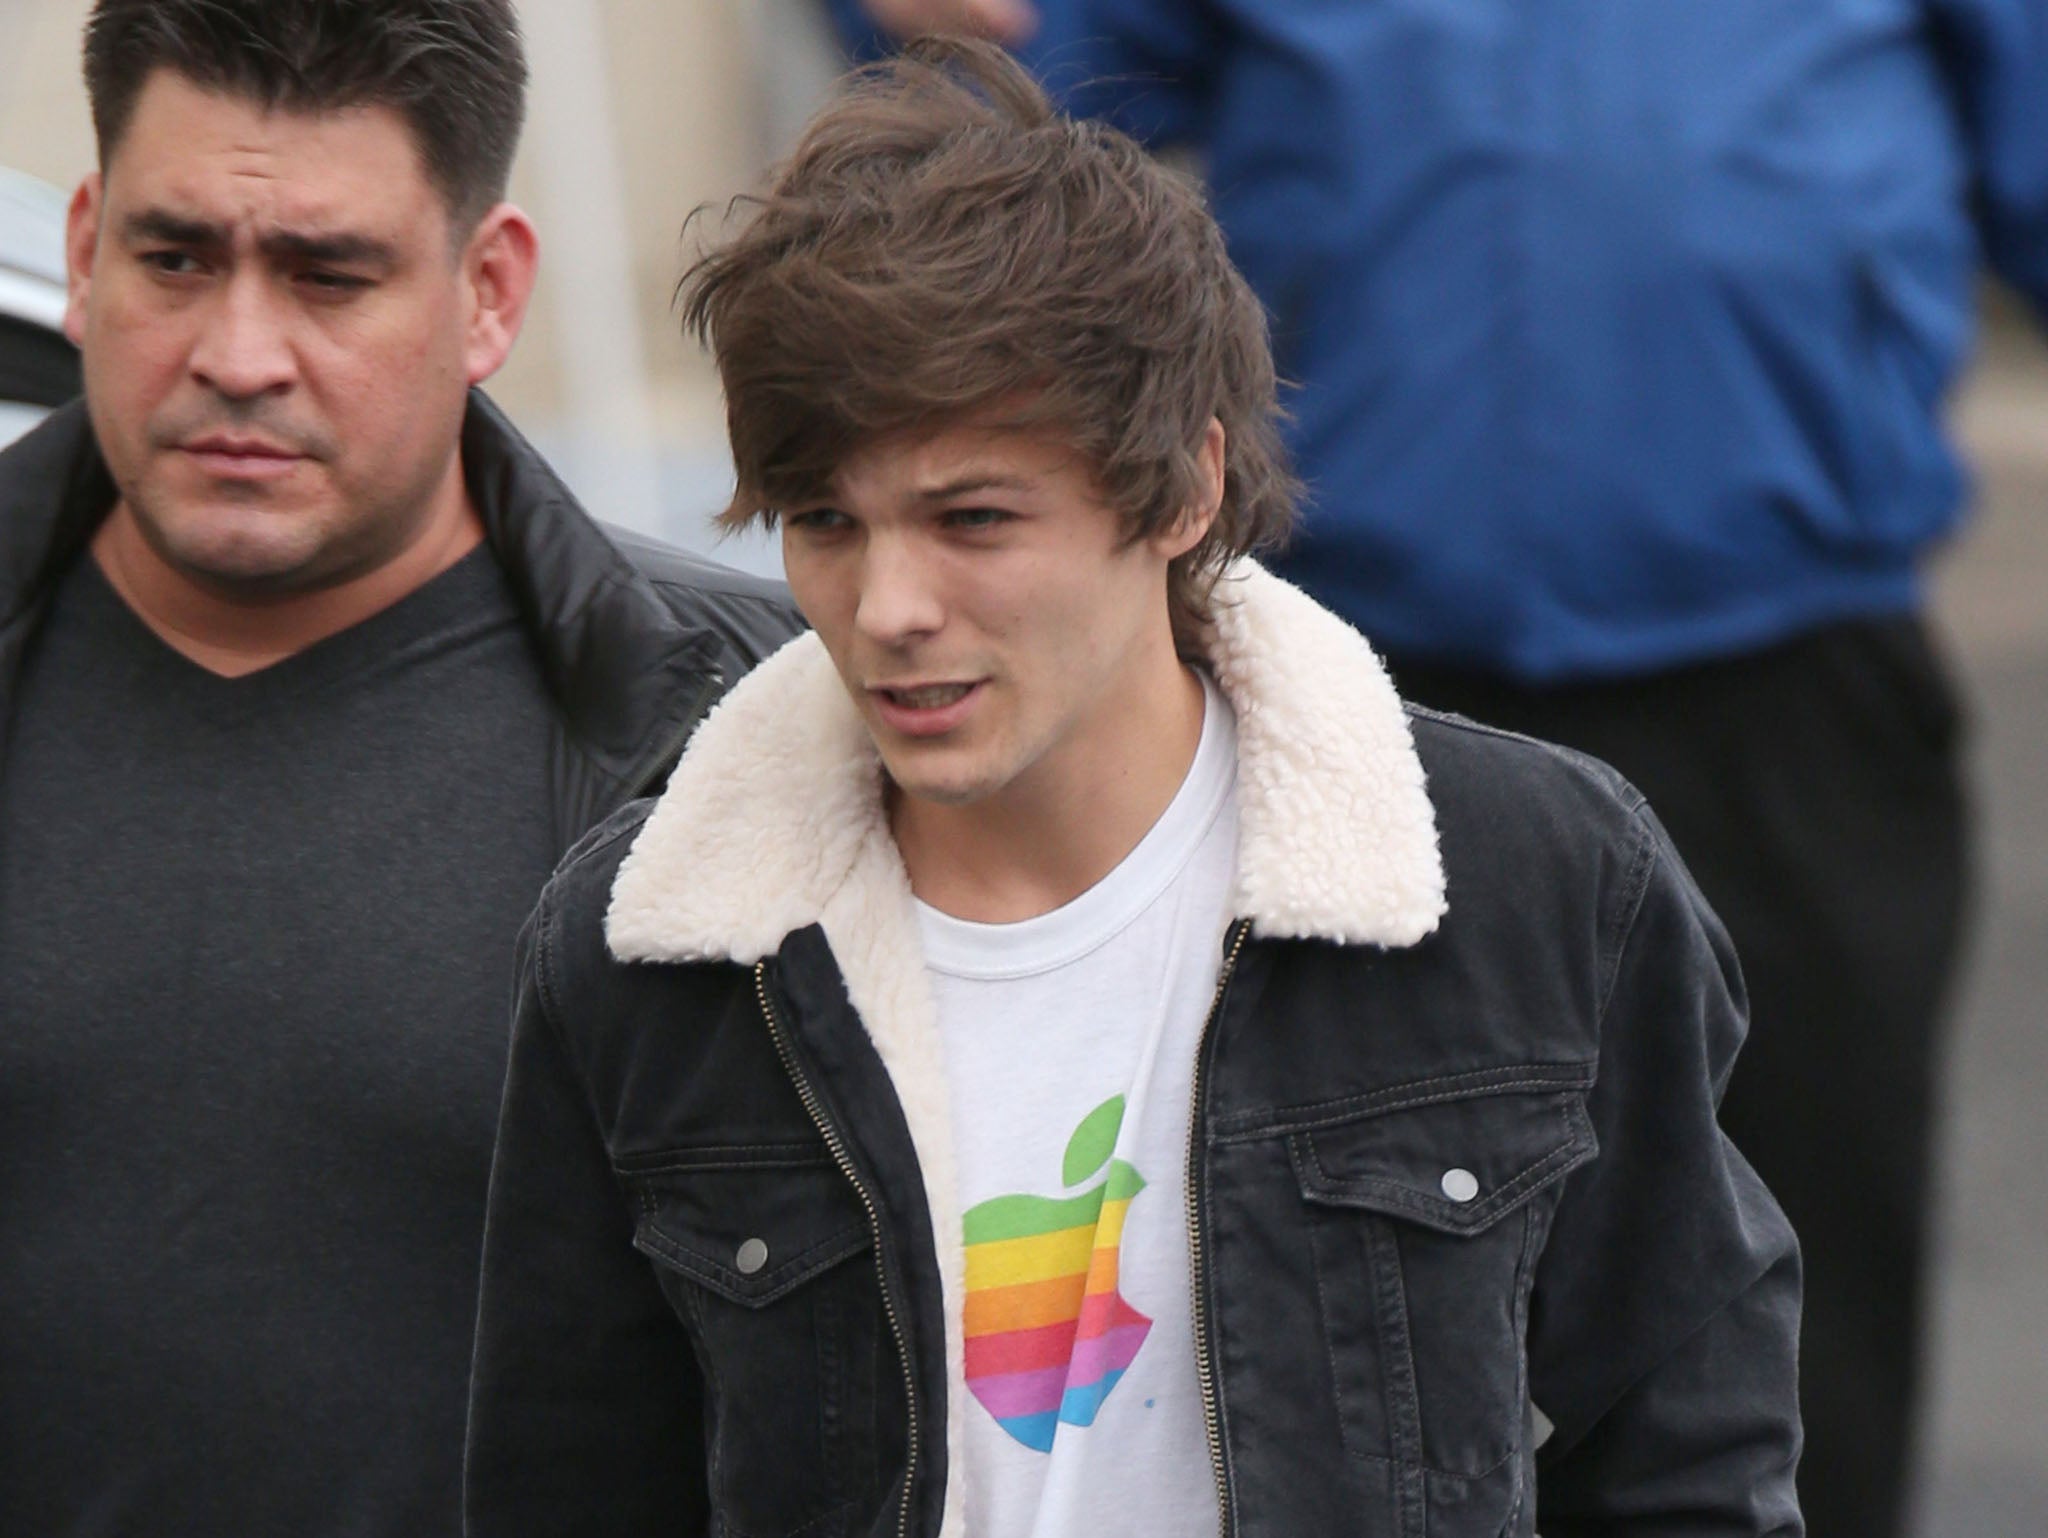 Louis Tomlinson showed his support for gay Apple CEO Tim Cook on a trip to The X Factor studio in November 2014